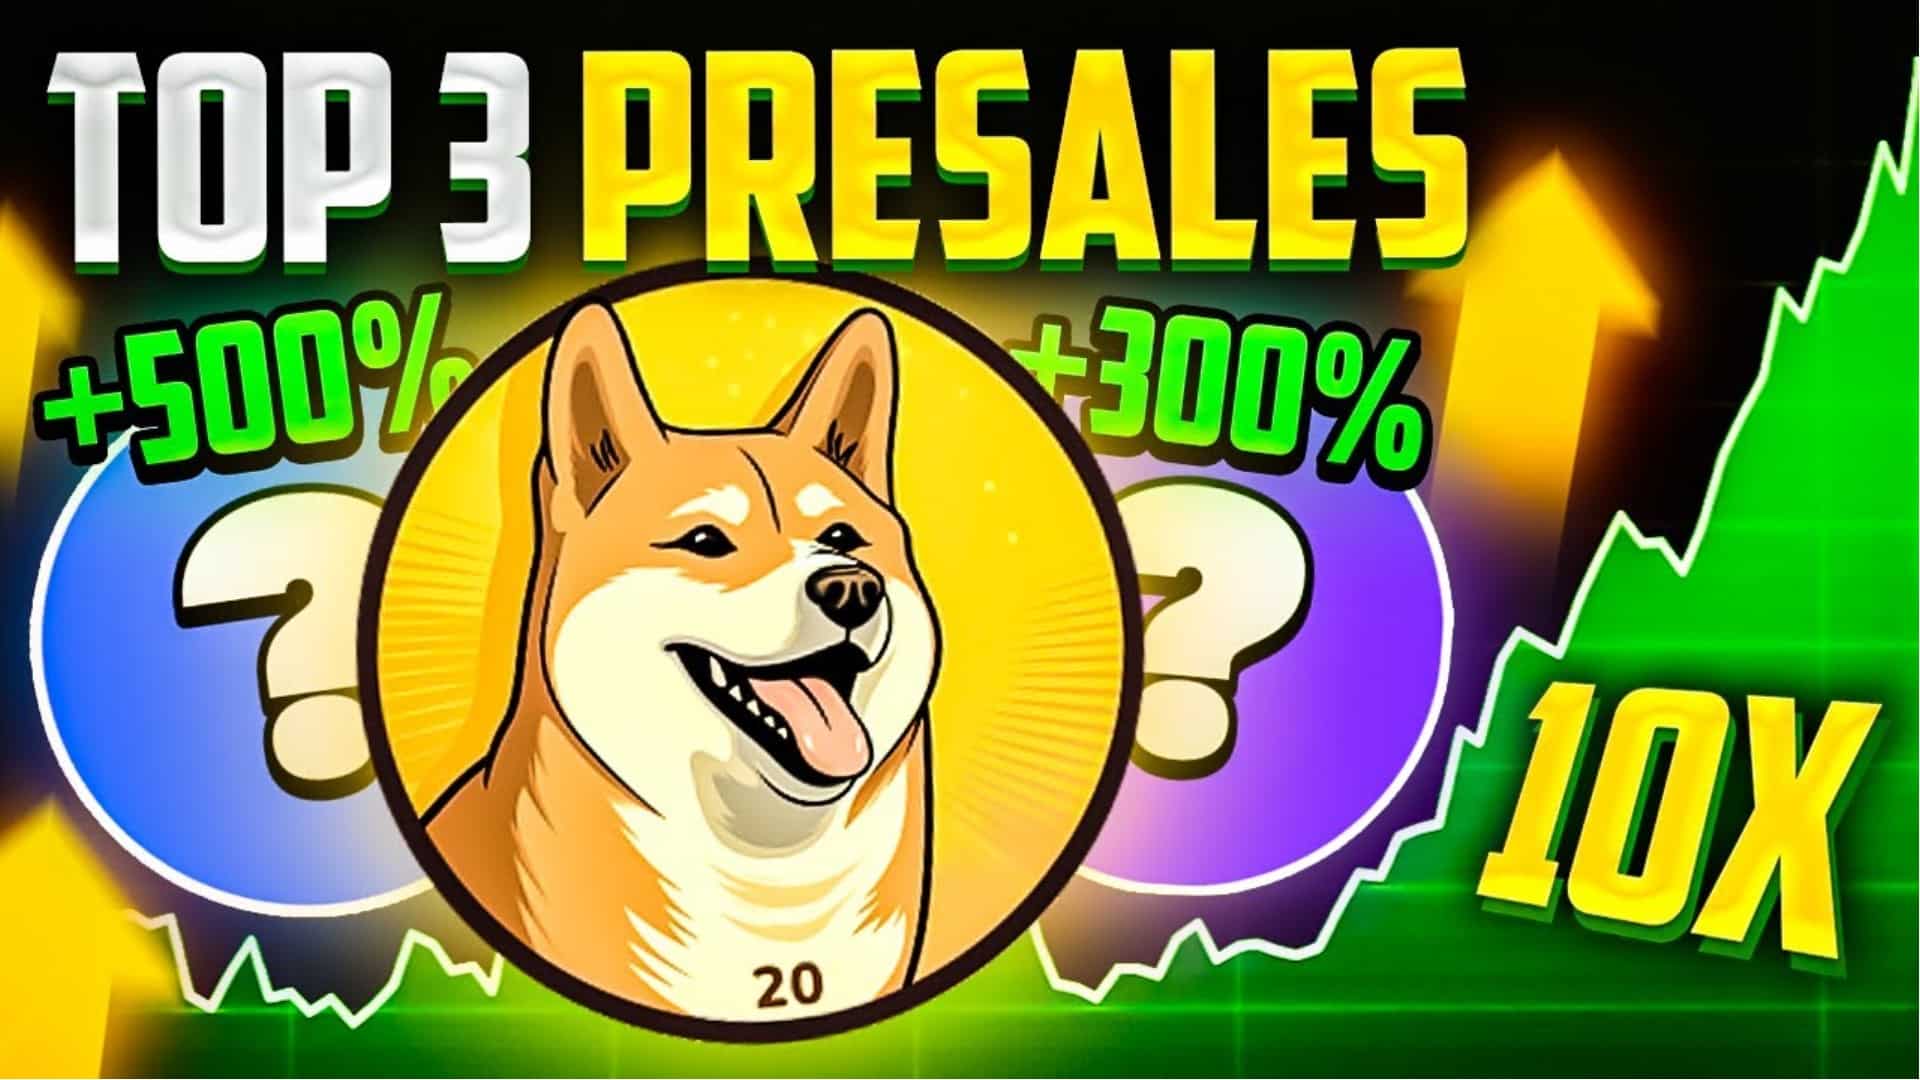 Top 3 Presale Opportunities for Potential 100x Gain – $TUK, $GBTC, and $DOGE20